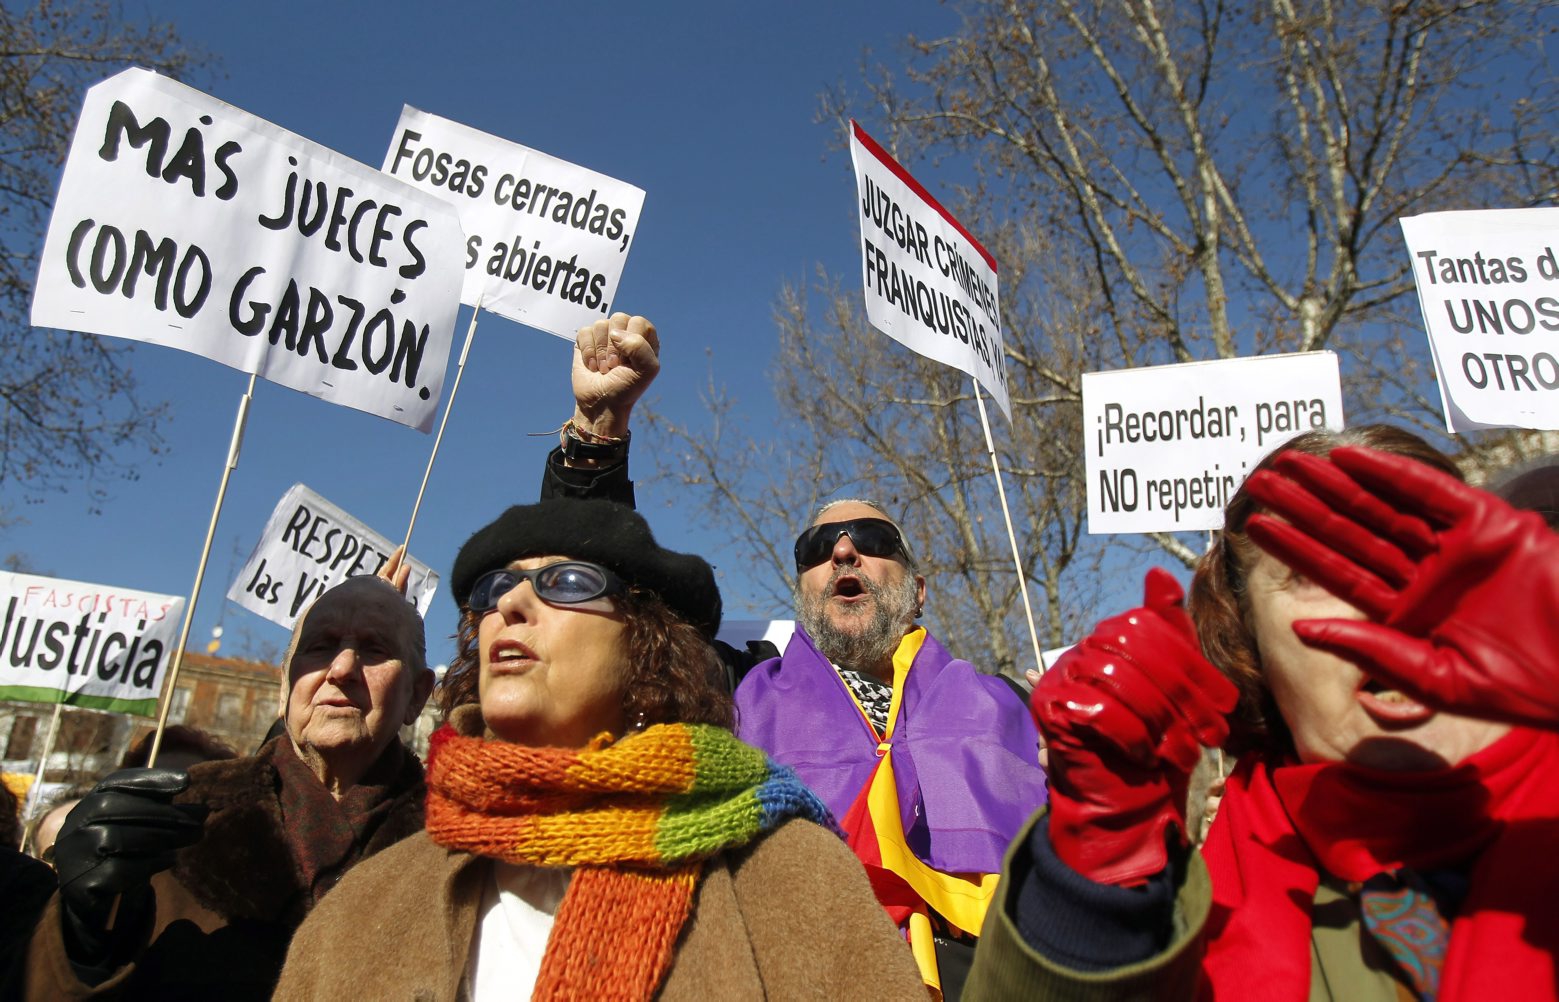 People hold banners reading, from left, "More Judges like Garzon", "Memory, to do not repeat it", "Judge Franco's crimes" during a protest in support of Judge  Garzon in Madrid, Spain, Sunday, Feb. 12, 2012. Thousands have demonstrated Sunday in support of a Spanish judge who won global fame for taking on international human rights cases but who has now been barred from the bench after being convicted of ordering jailhouse wiretaps. Baltasar Garzon, 56, was unanimously convicted on Feb. 9 by a seven-judge panel at the Supreme Court, marking a spectacular fall from grace for the nation's most prominent jurist. (AP Photo/Andres Kudacki) SPANIEN PROZESS BALTASAR GARZON PROTEST